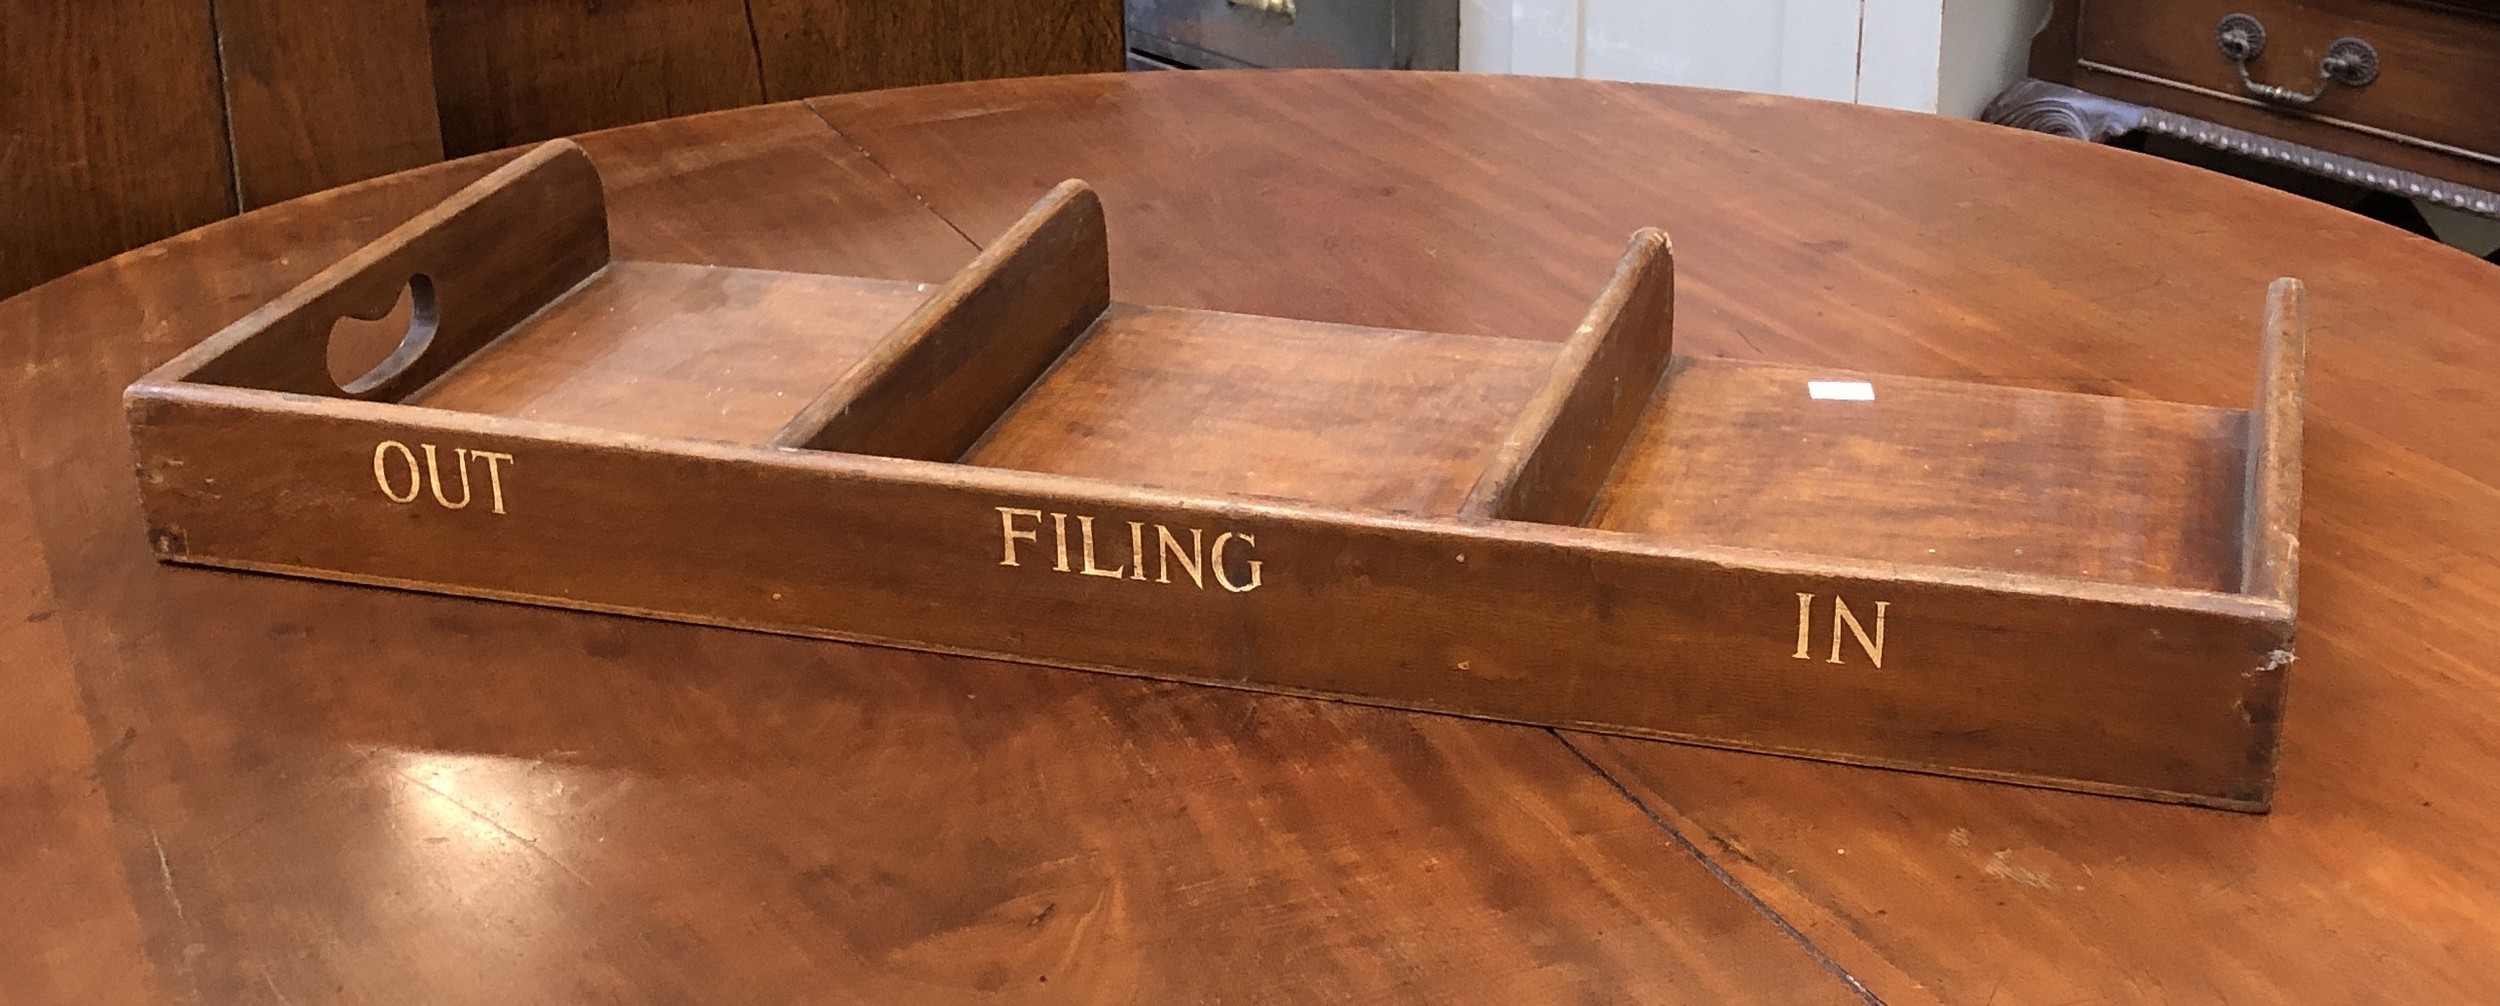 A mahogany desk tray, 'In, Filing, Out', 70.5x33x6.5cm; each section approx 31x21.5m - Image 3 of 3